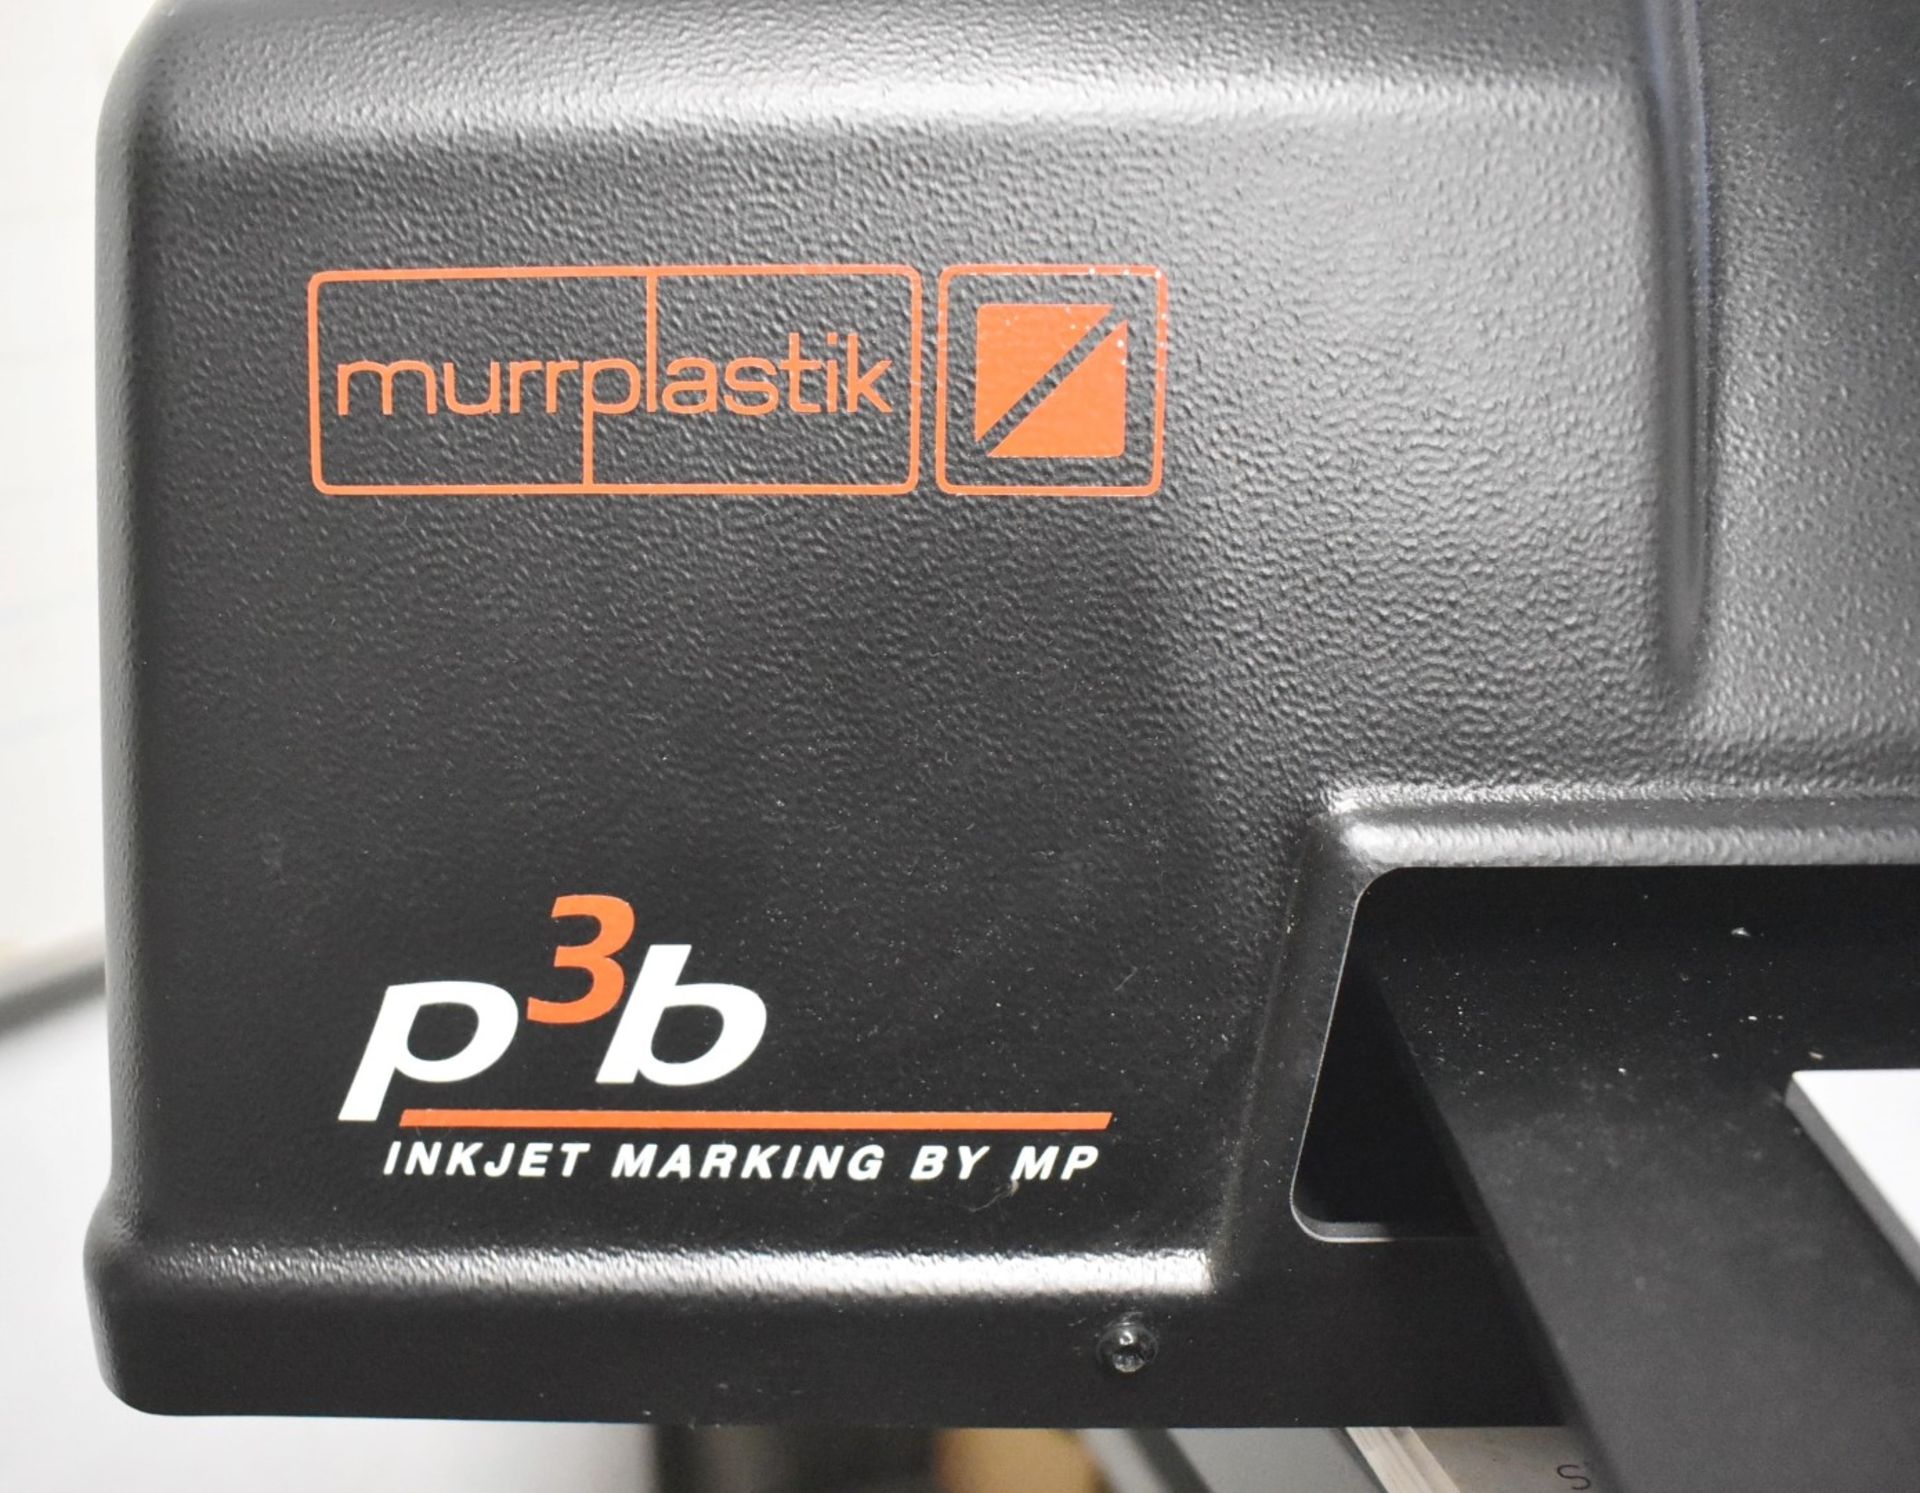 1 x Murrplastik p3b Inkjet Surface Etching Labelling System With Power Adaptor - Image 3 of 8